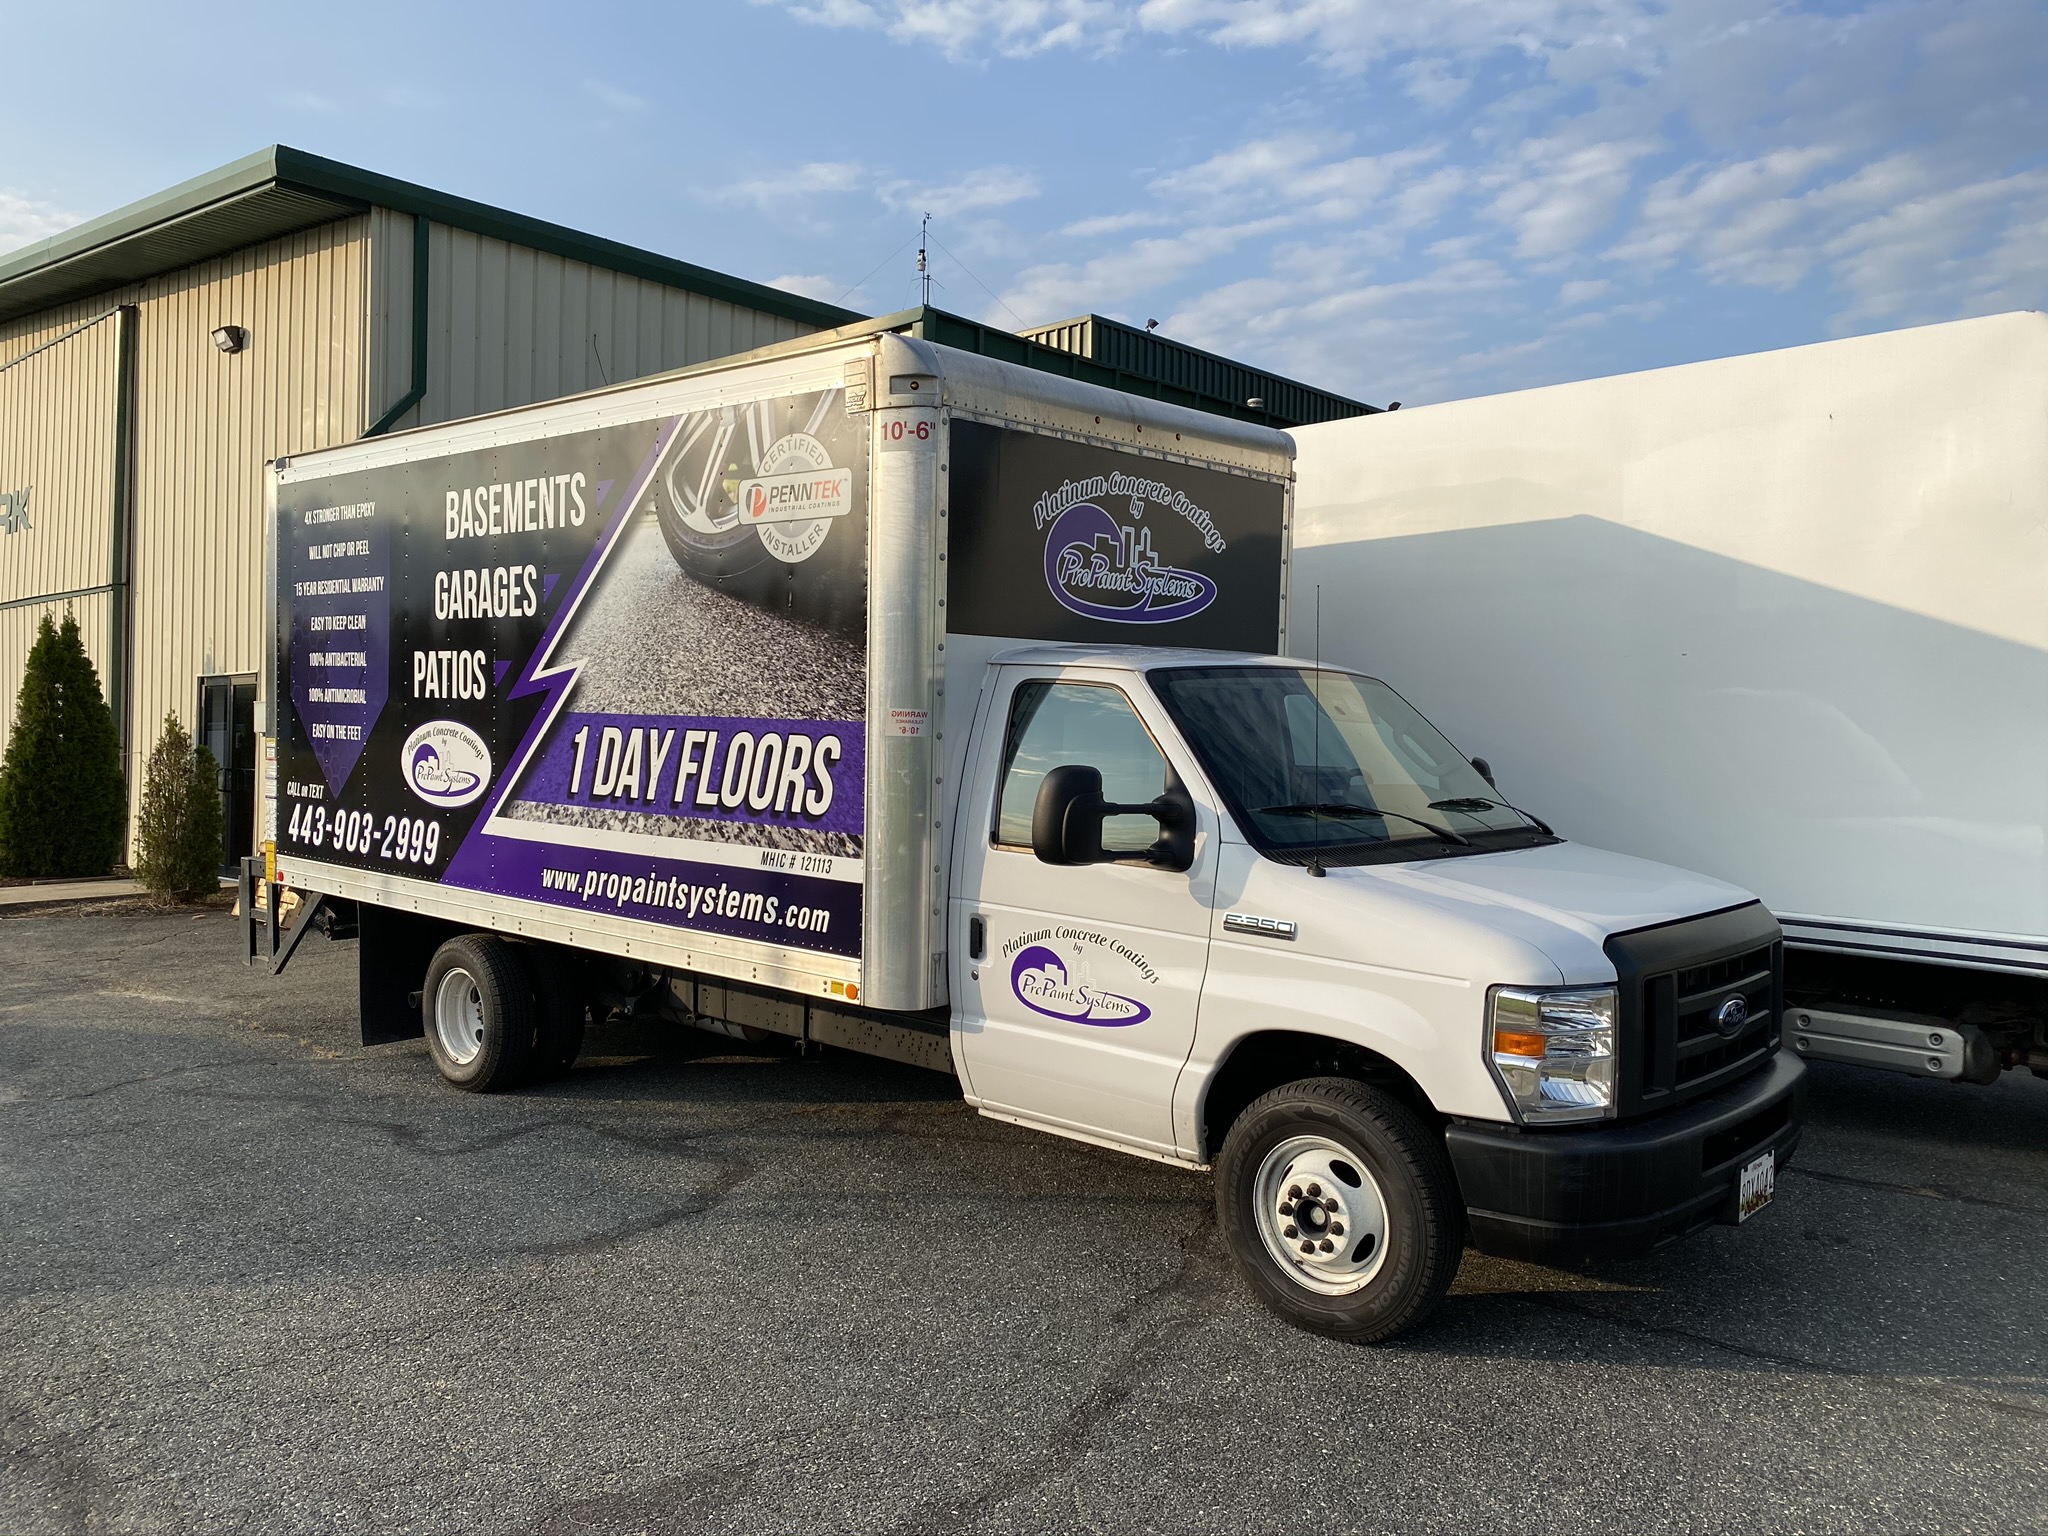 Pro Paint Systems Branded Truck